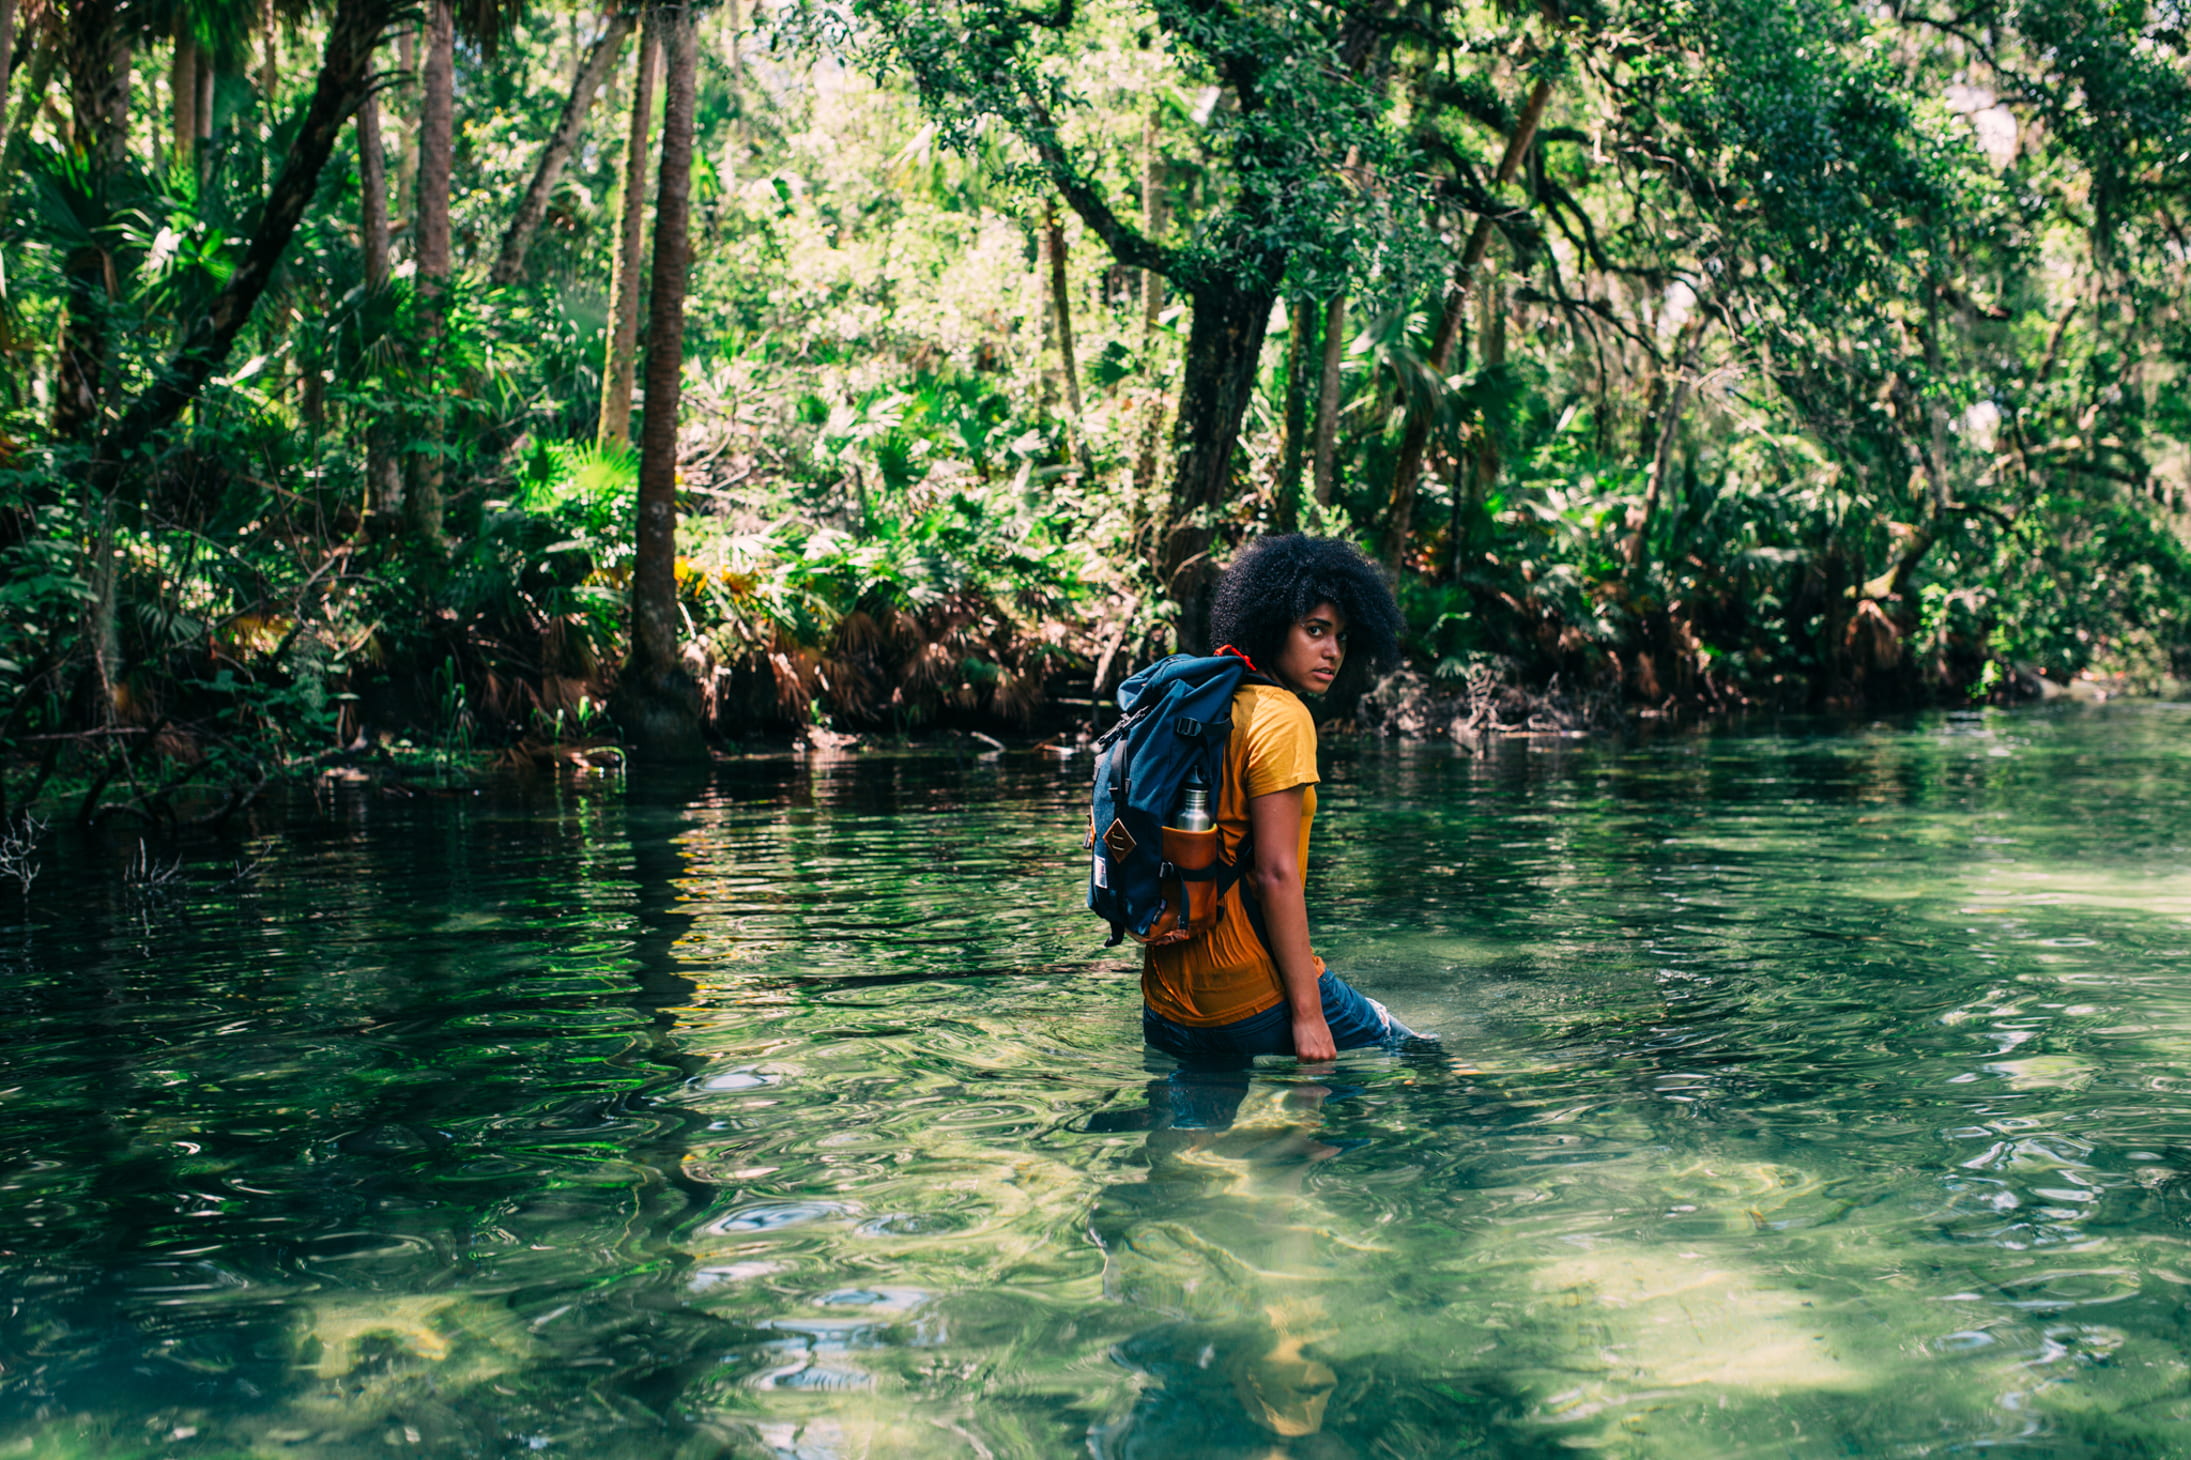 Person in an orange top wearing a backpack walking on a body of water in forest during daytime, man carrying a backpack in a body of water